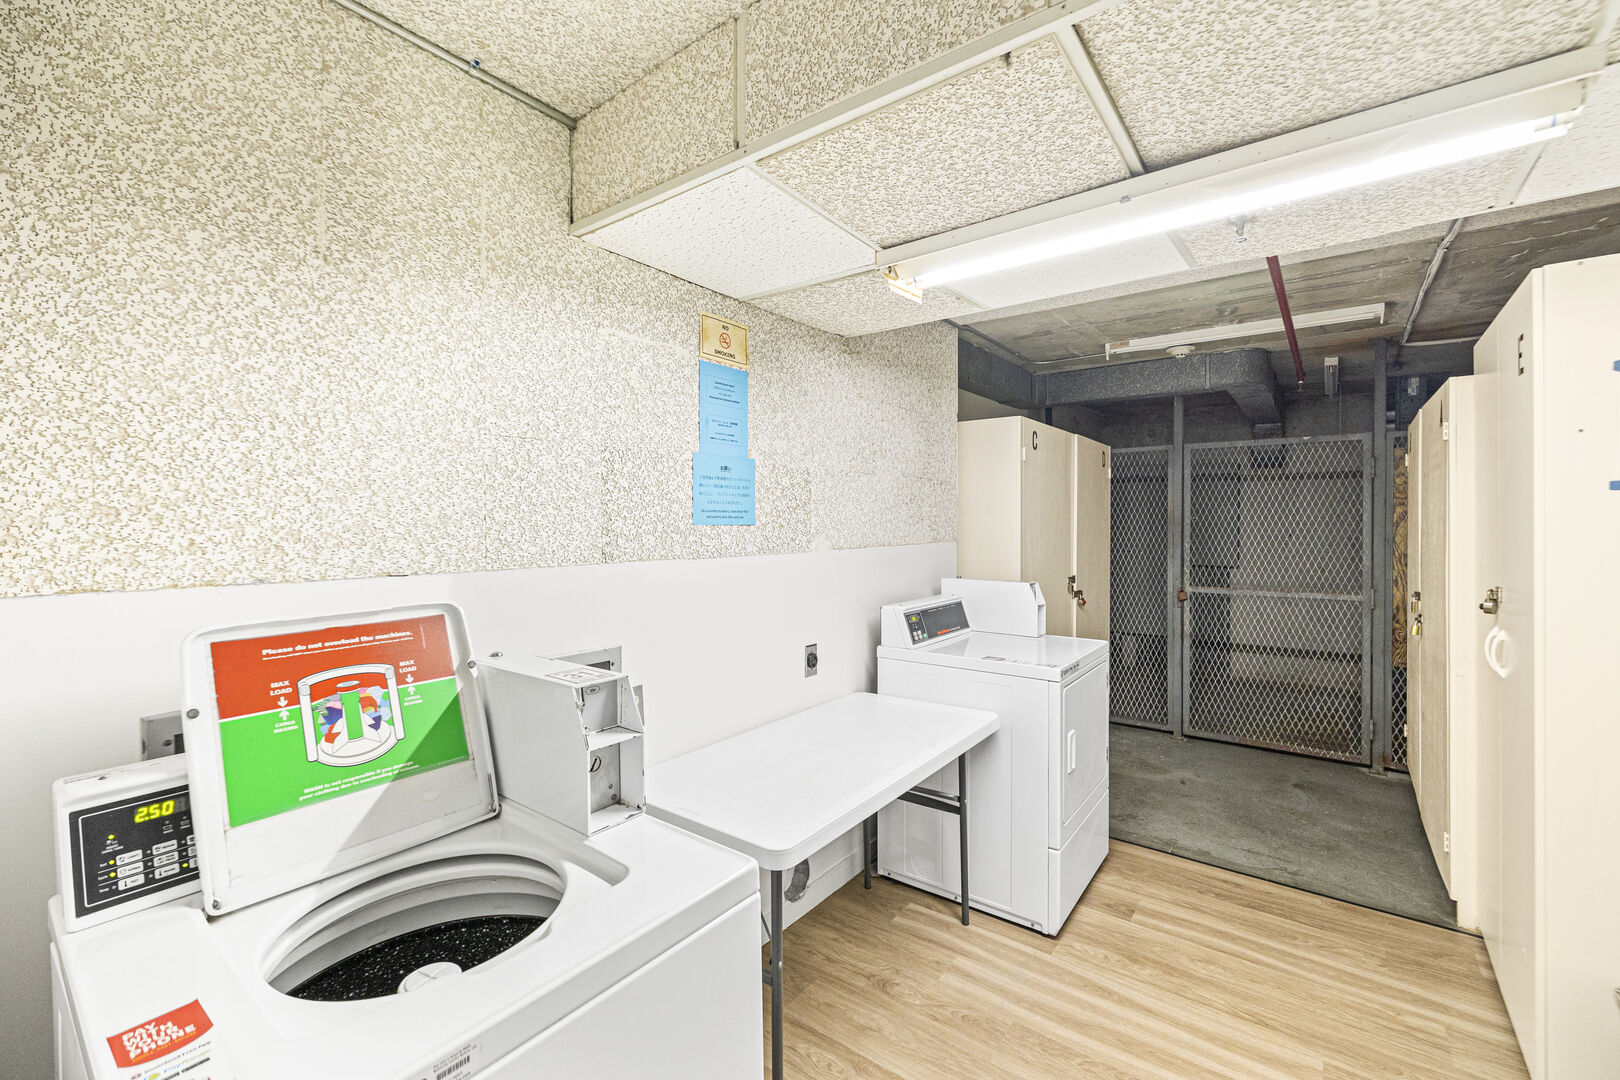 Laundry room on every floor with coin-operated washers and dryers.